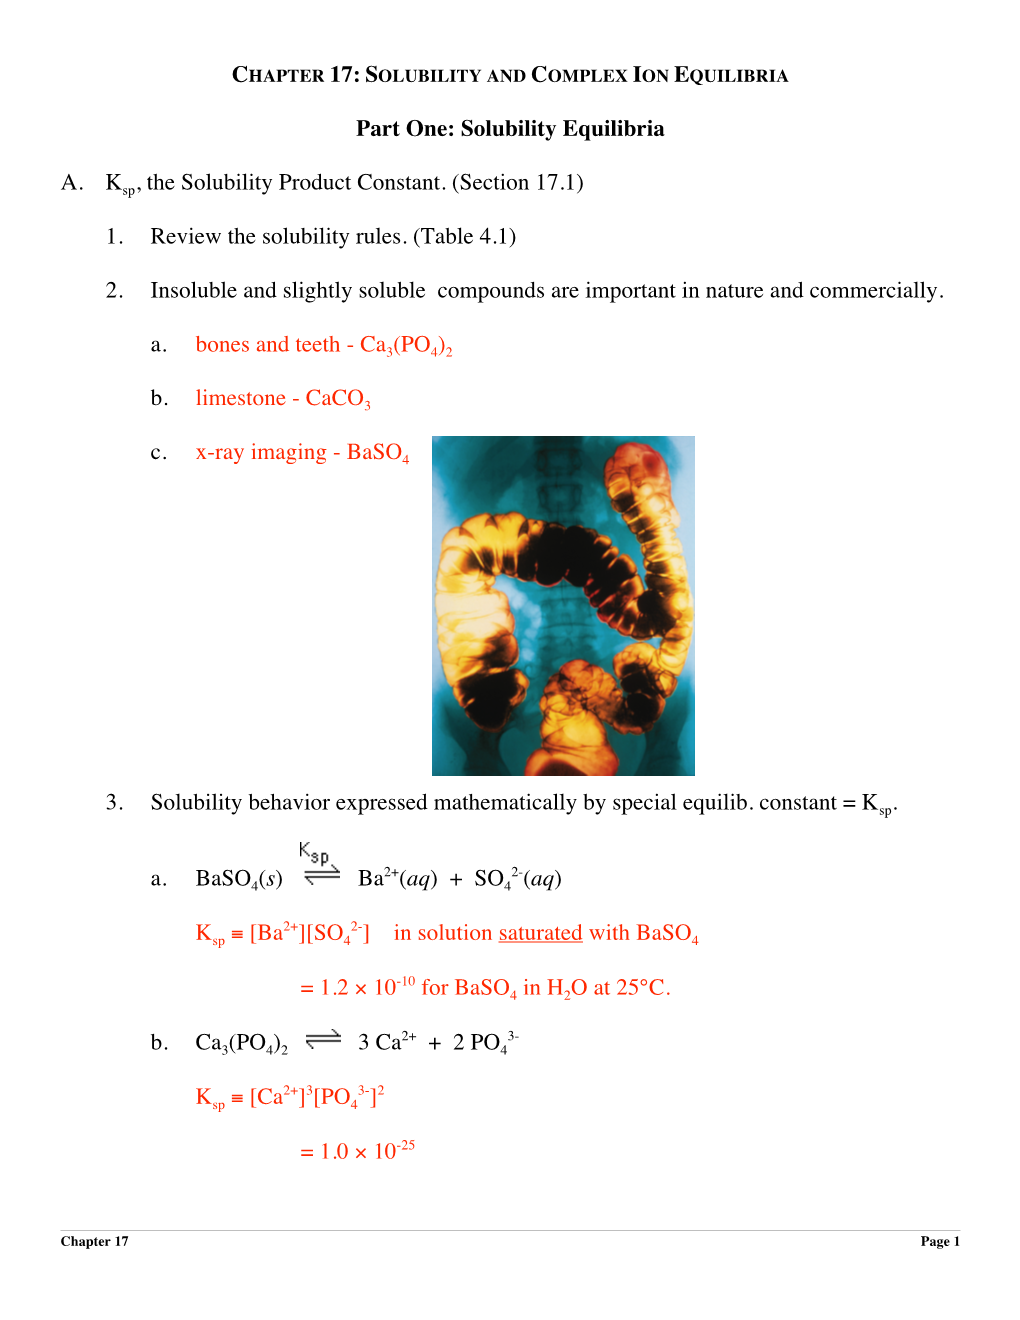 (Section 17.1) 1. Review the Solubility Rules. (Table 4